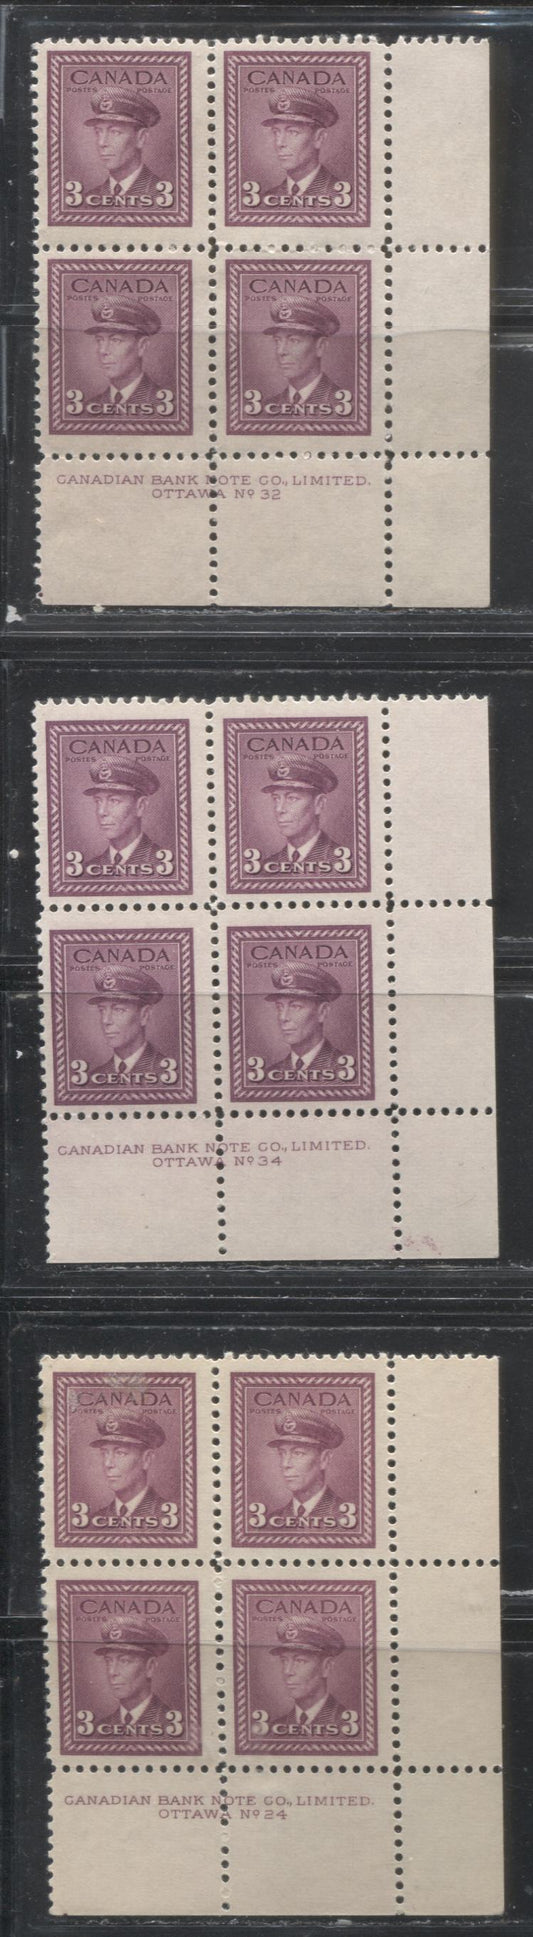 Lot 38 Canada #252 3c  Rosy Plum & Deep Rosy Claret King George VI  1942-1949 War Issue, Fine OG Plate 24 & 34 Lower Right Blocks of 4 With and Without Plate Dot at LL